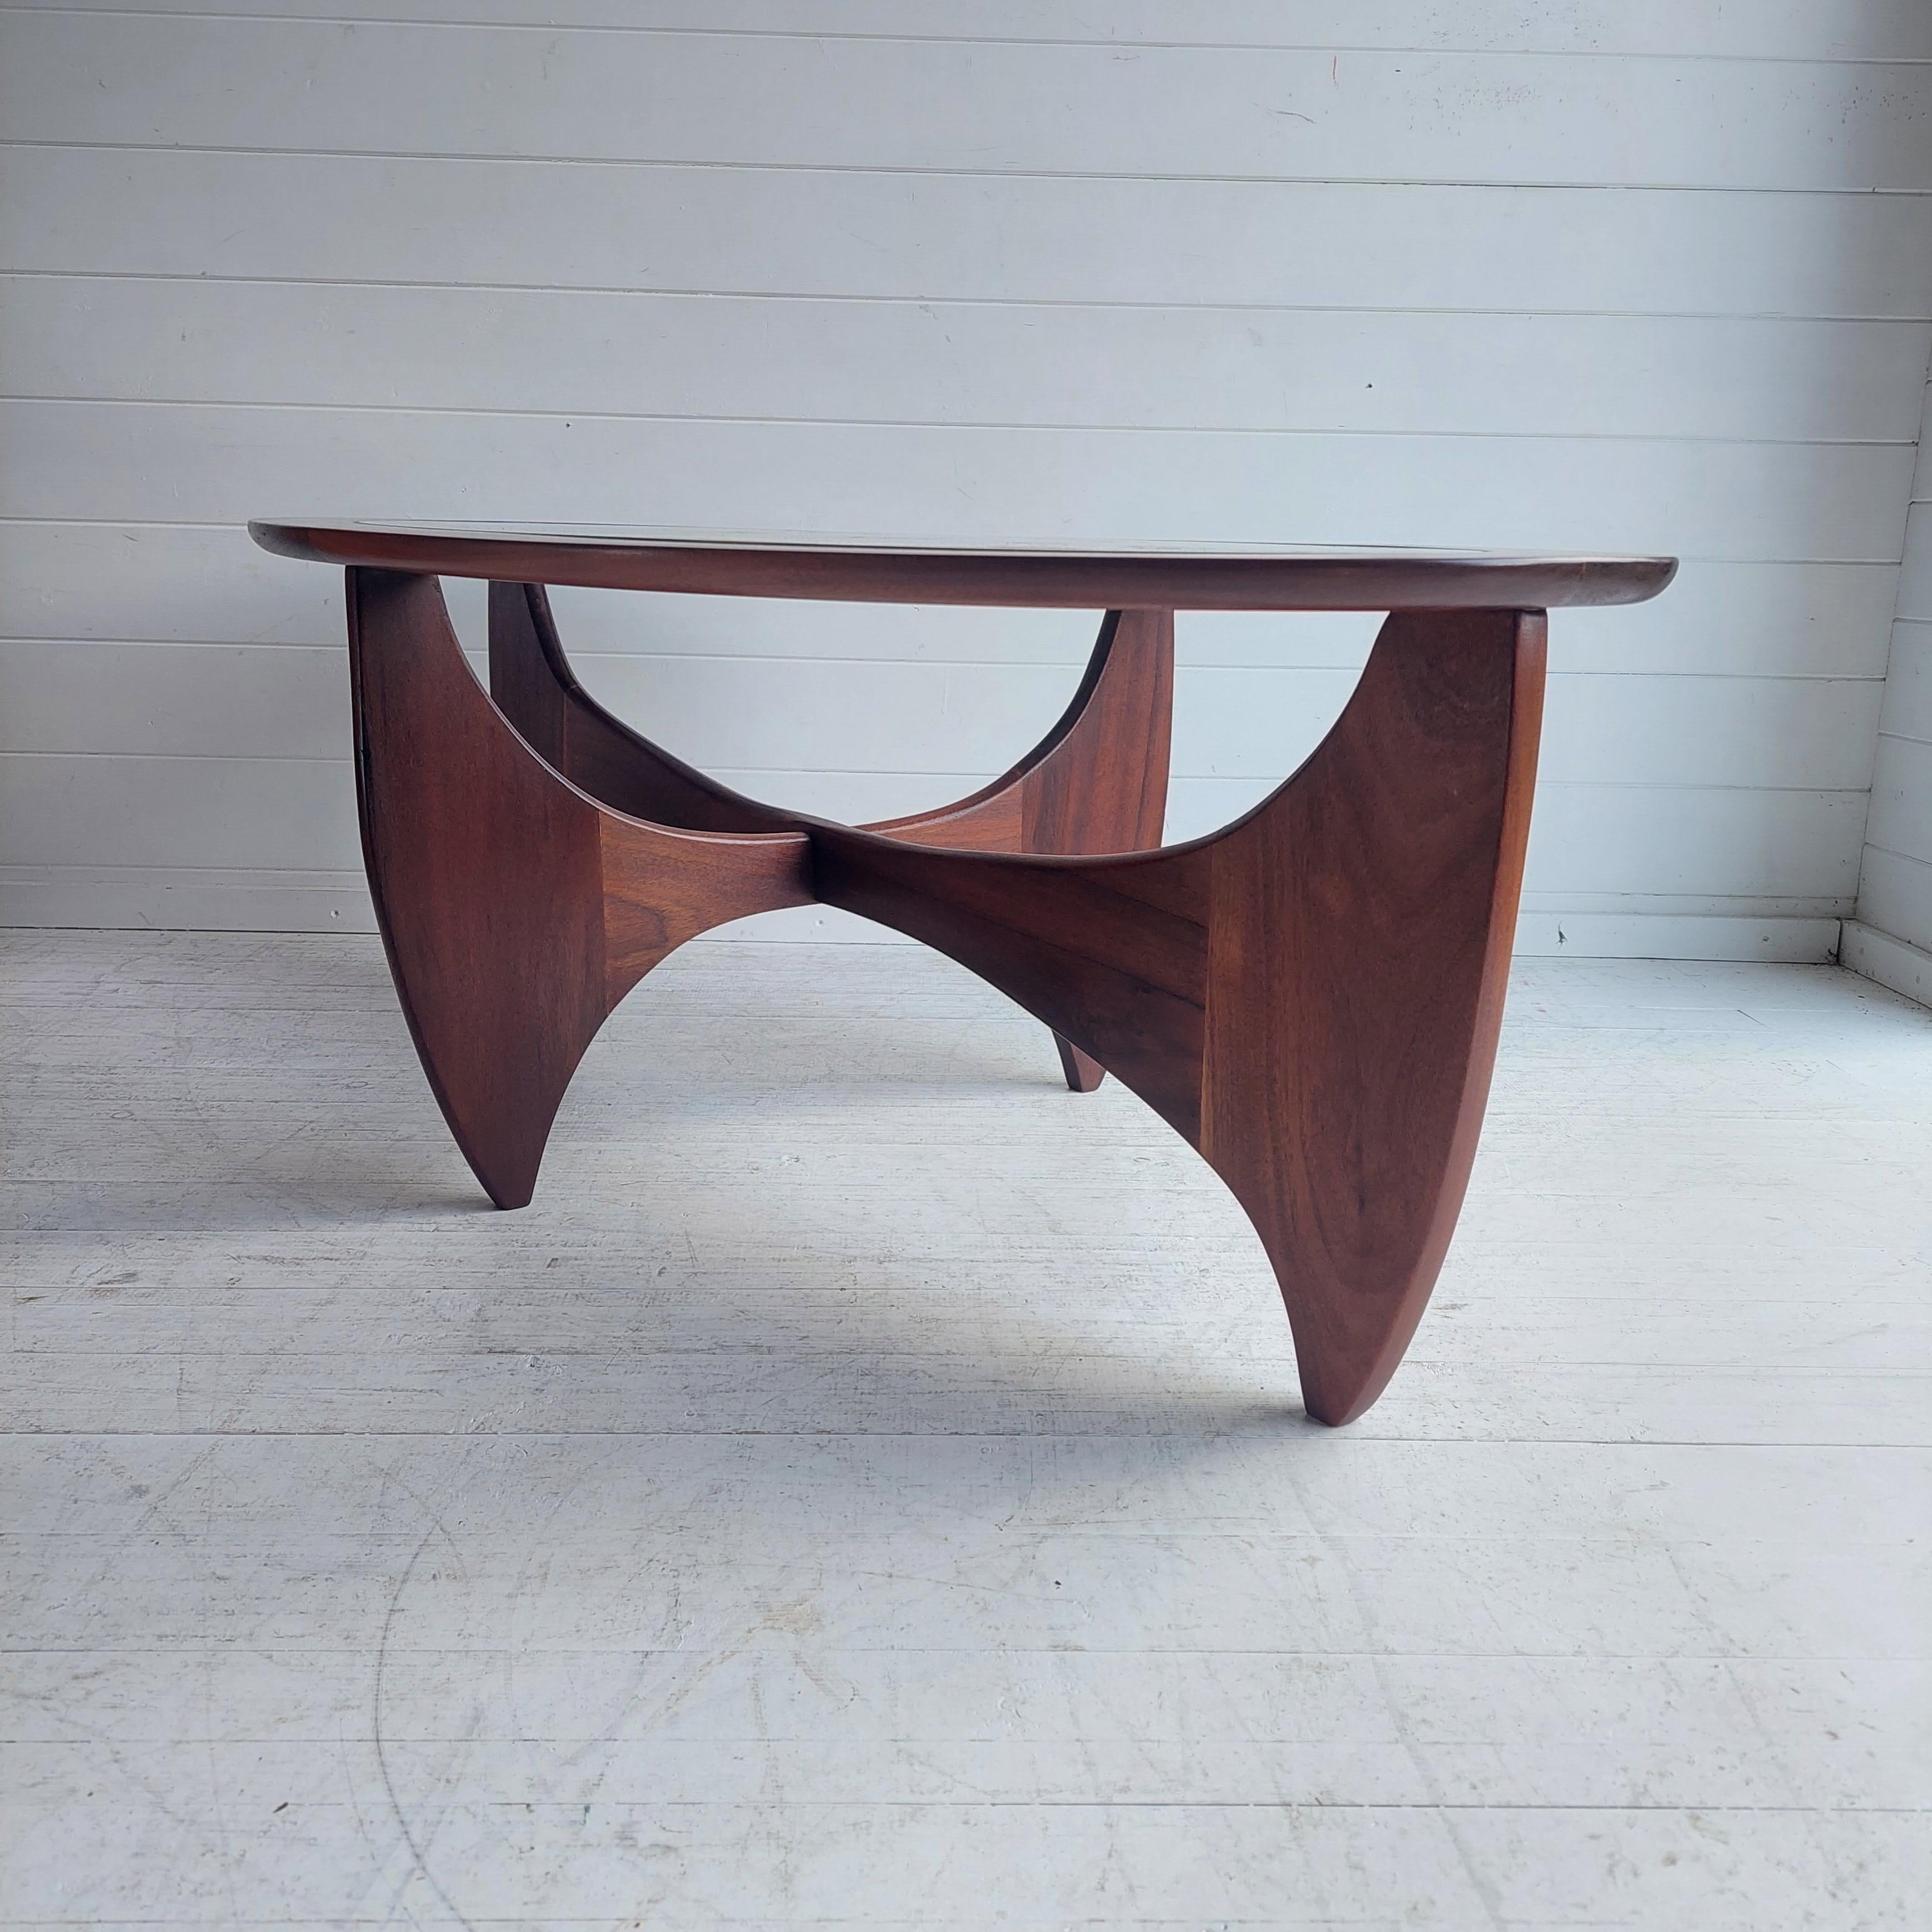 g plan astro oval coffee table